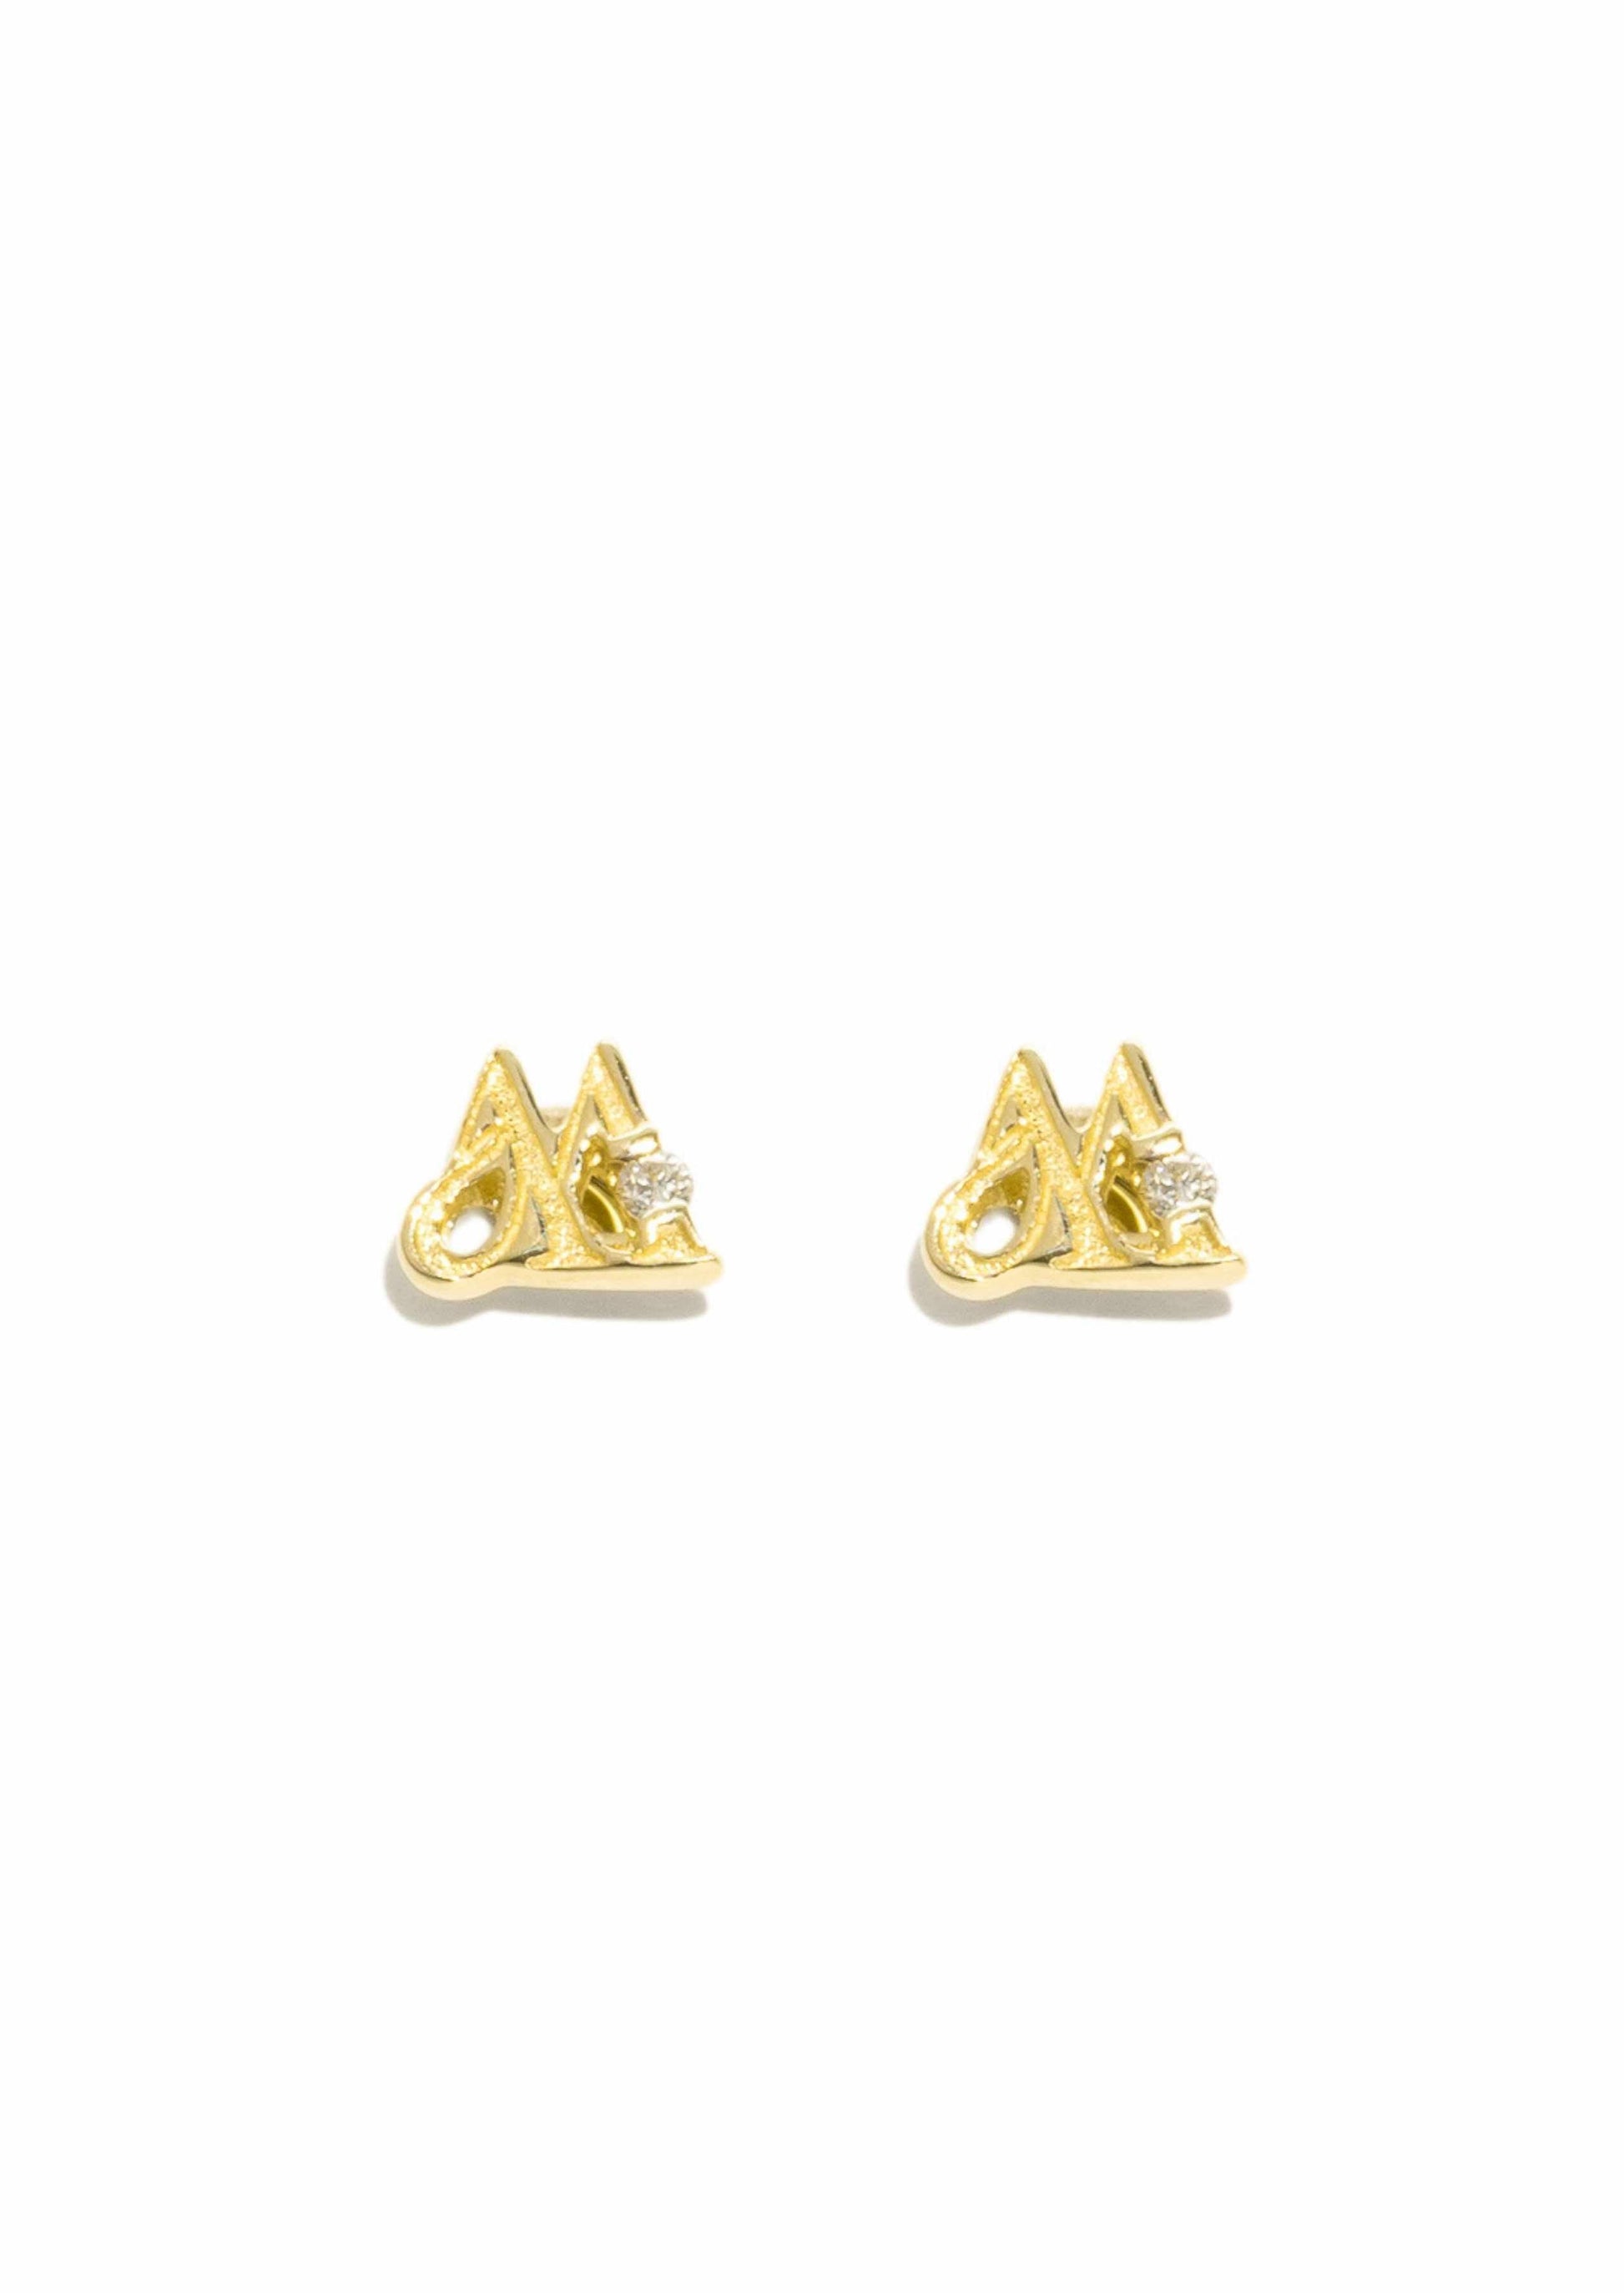 The Diamond Insignia 9ct Solid Gold Stud Earrings - Molten Store